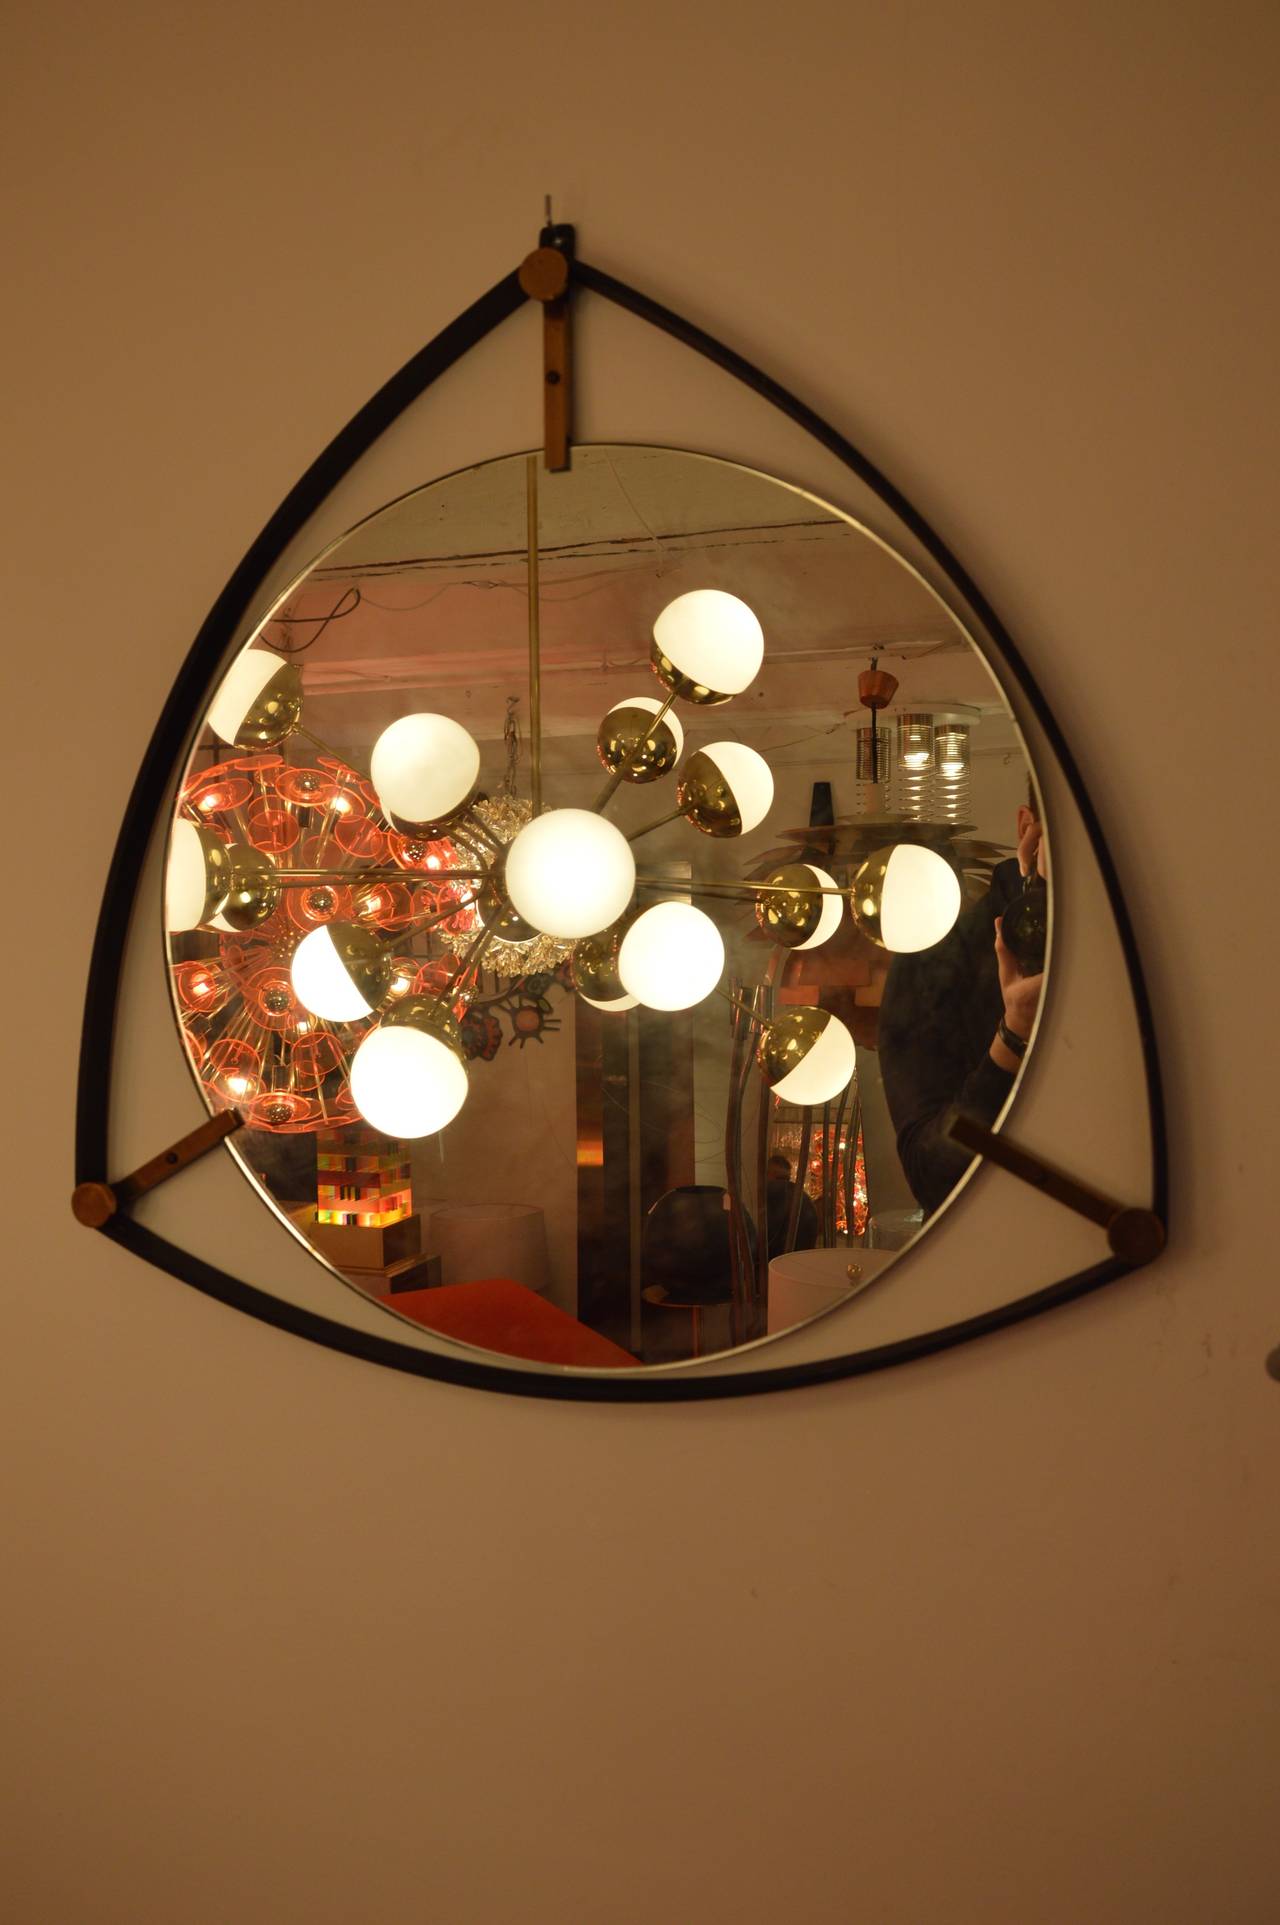 Italian triangular mirror with frame in steel and brass circa 1950. 
Measures : 
H : 64cm 
L : 64cm 
D : 2,5cm 
Diameter of the mirror : 50cm